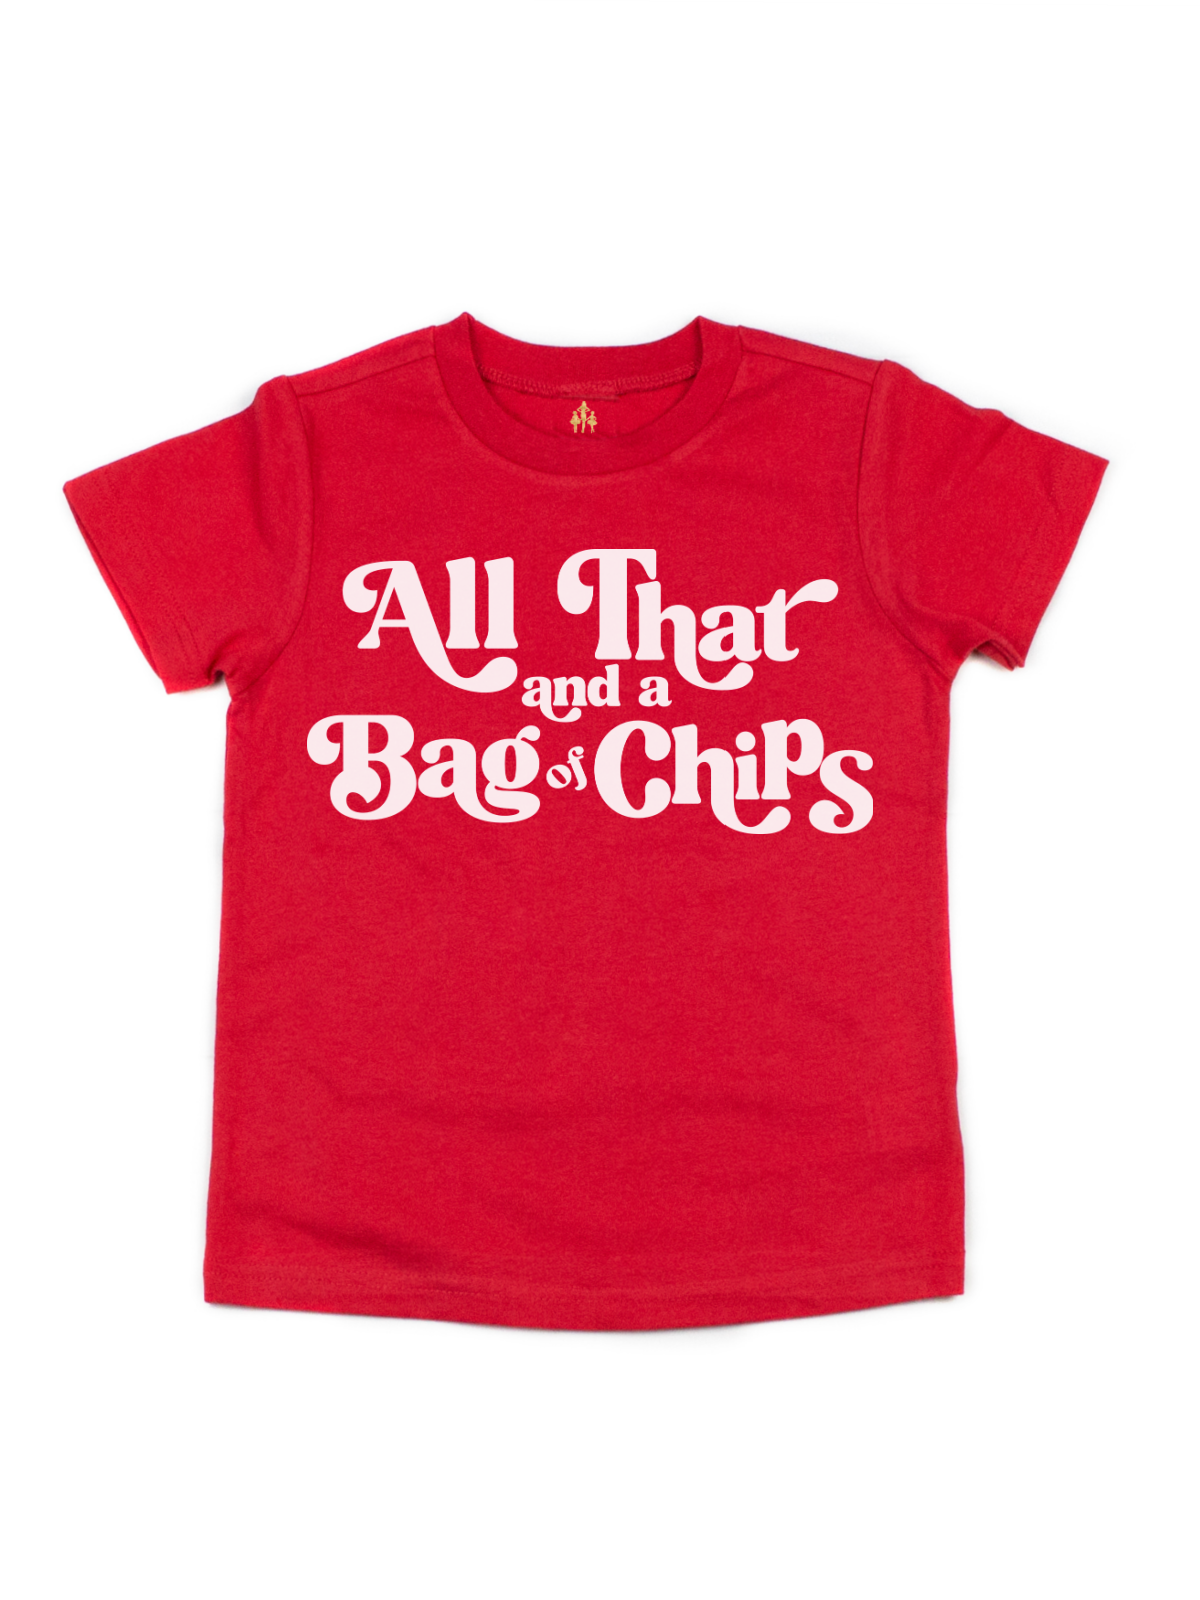 All That and a Bag of Chips Kids Retro 90s Shirt